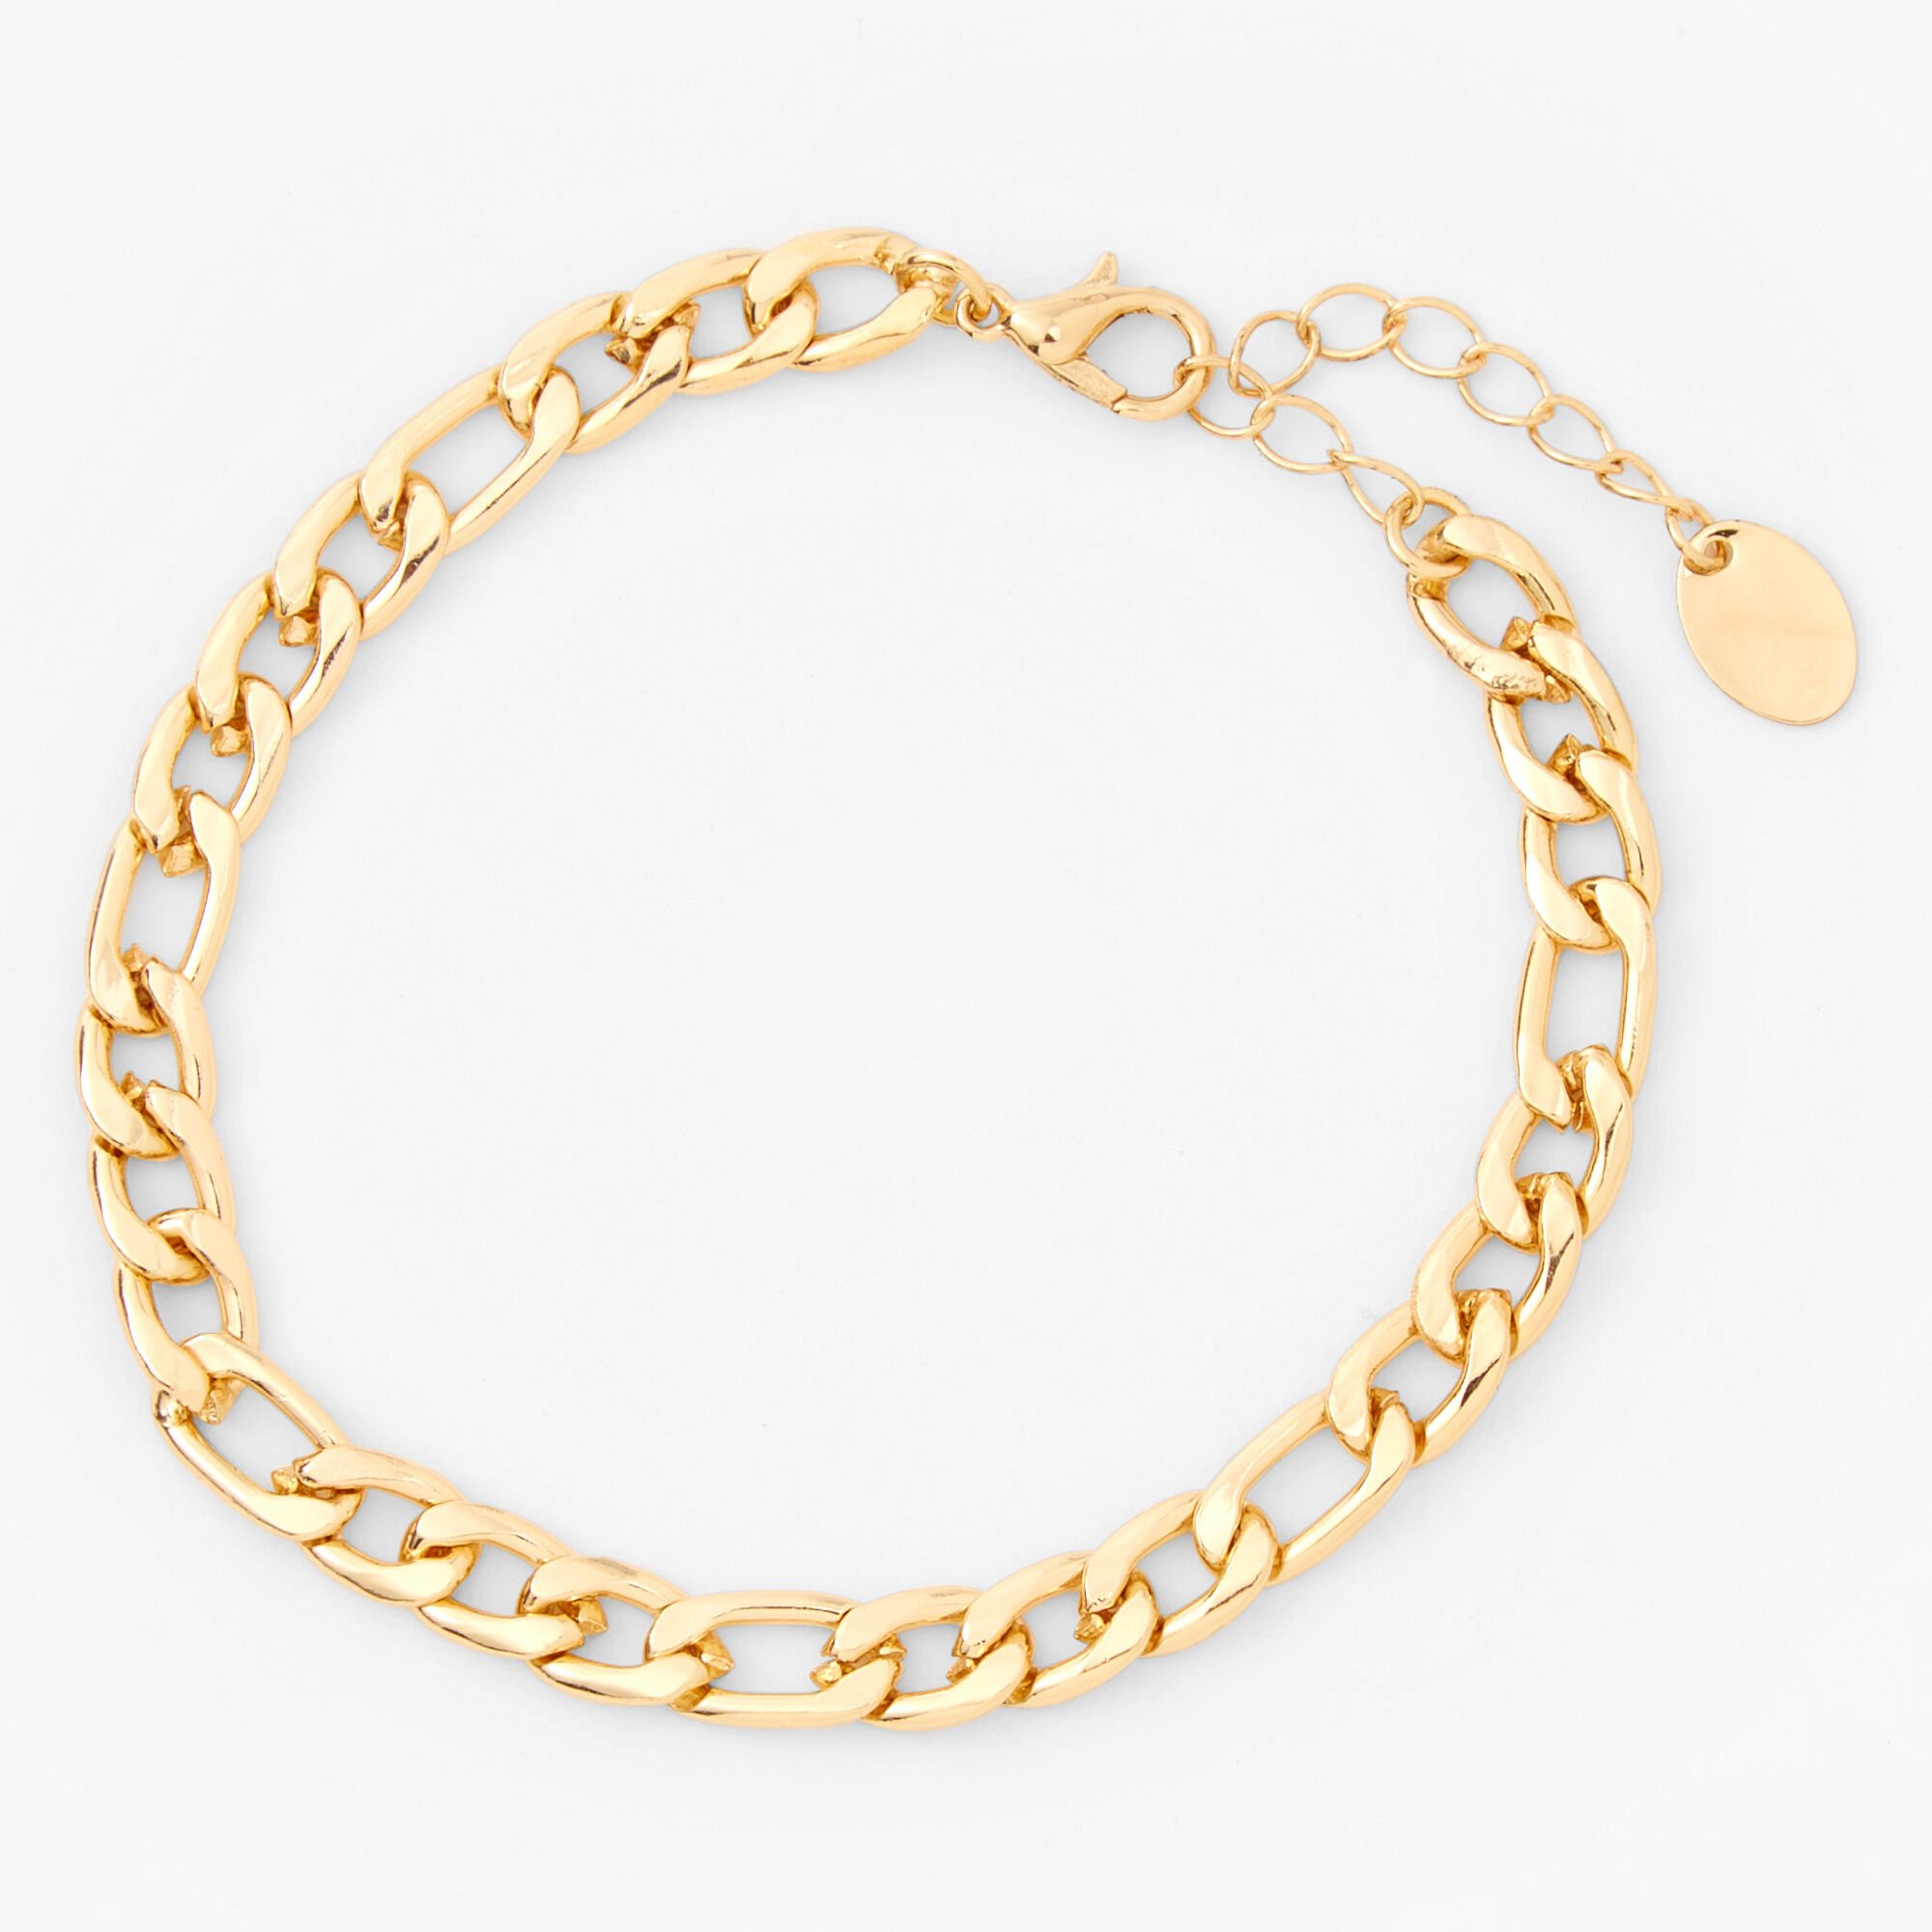 View Claires Tone Paperclip Link Chain Bracelet Gold information